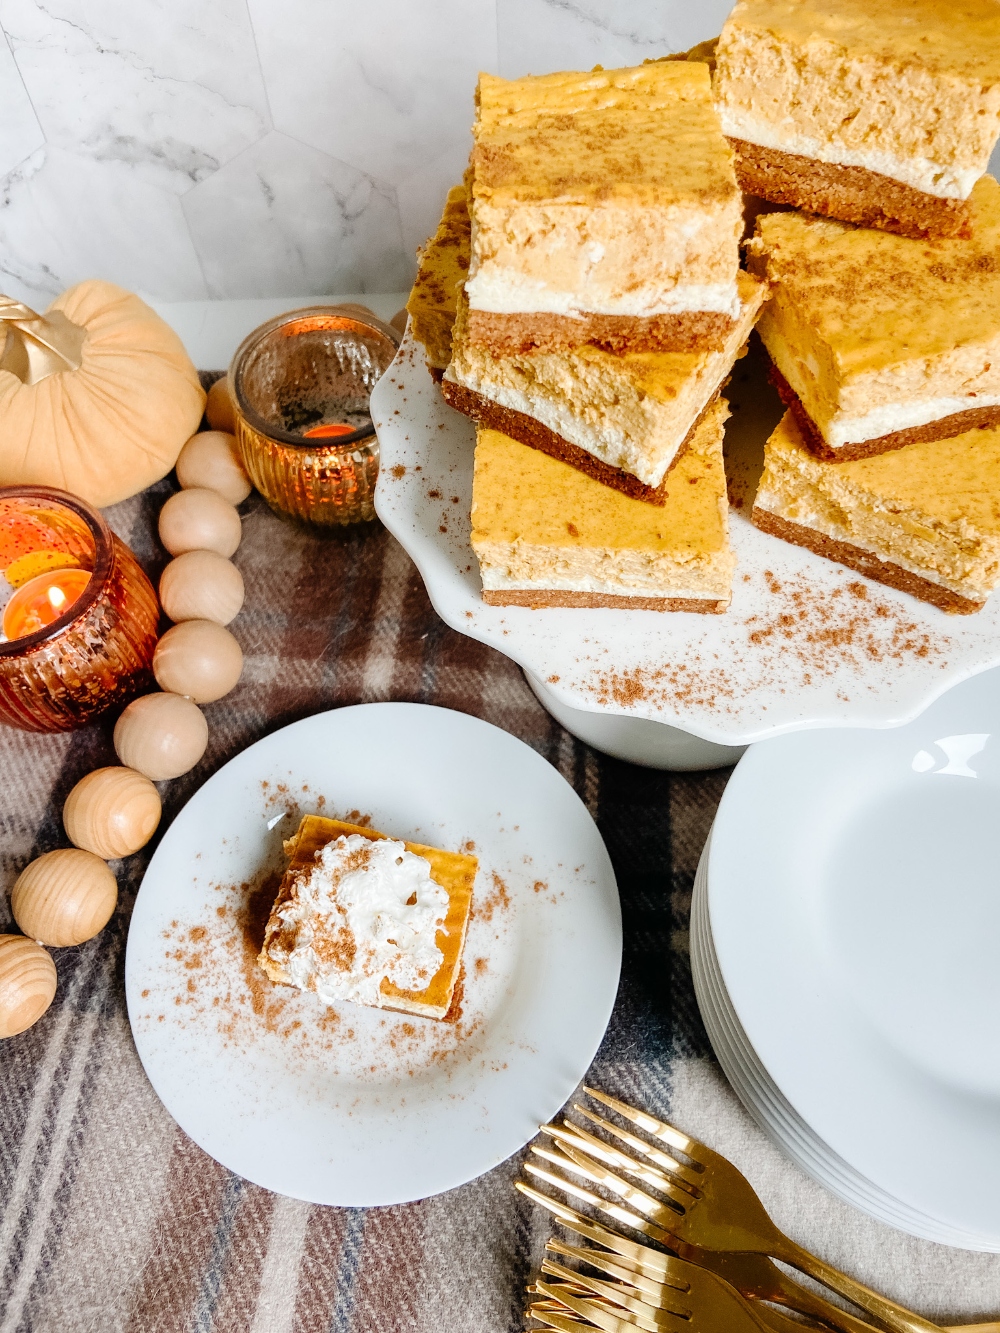 Triple Layer Pumpkin Cheesecake Bars. Creamy layers of cheesecake and pumpkin cheesecake with a ginger cinnamon crust for a low-carb treat perfect for Fall!